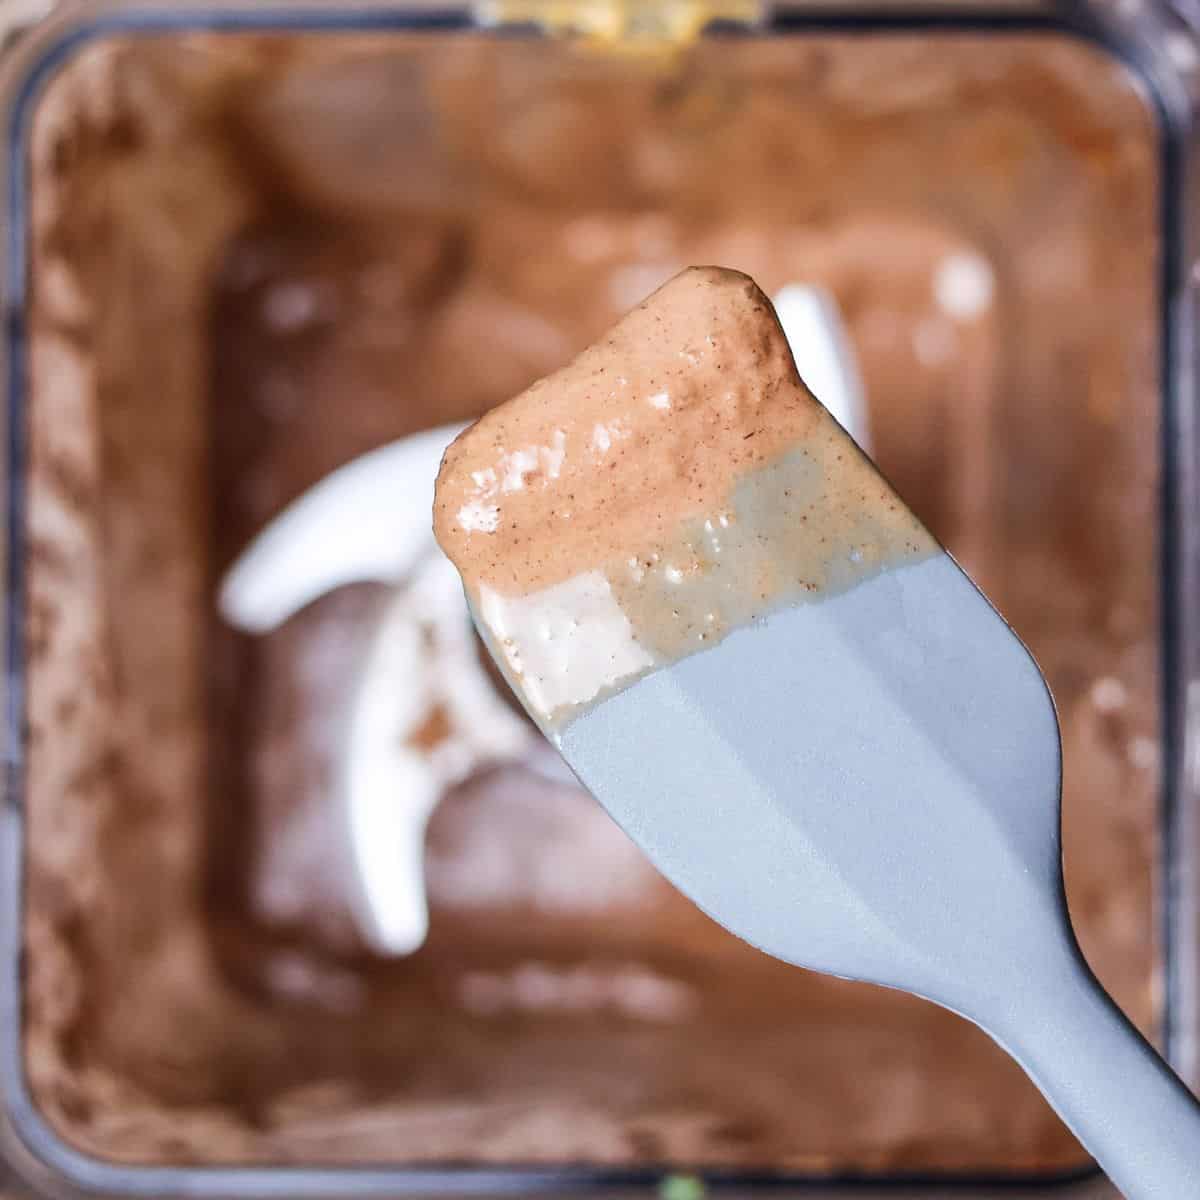 a small spatula with a scoop of chocolate peanut butter smoothie on it above the blender, indicating scooping a little out for a taste test.